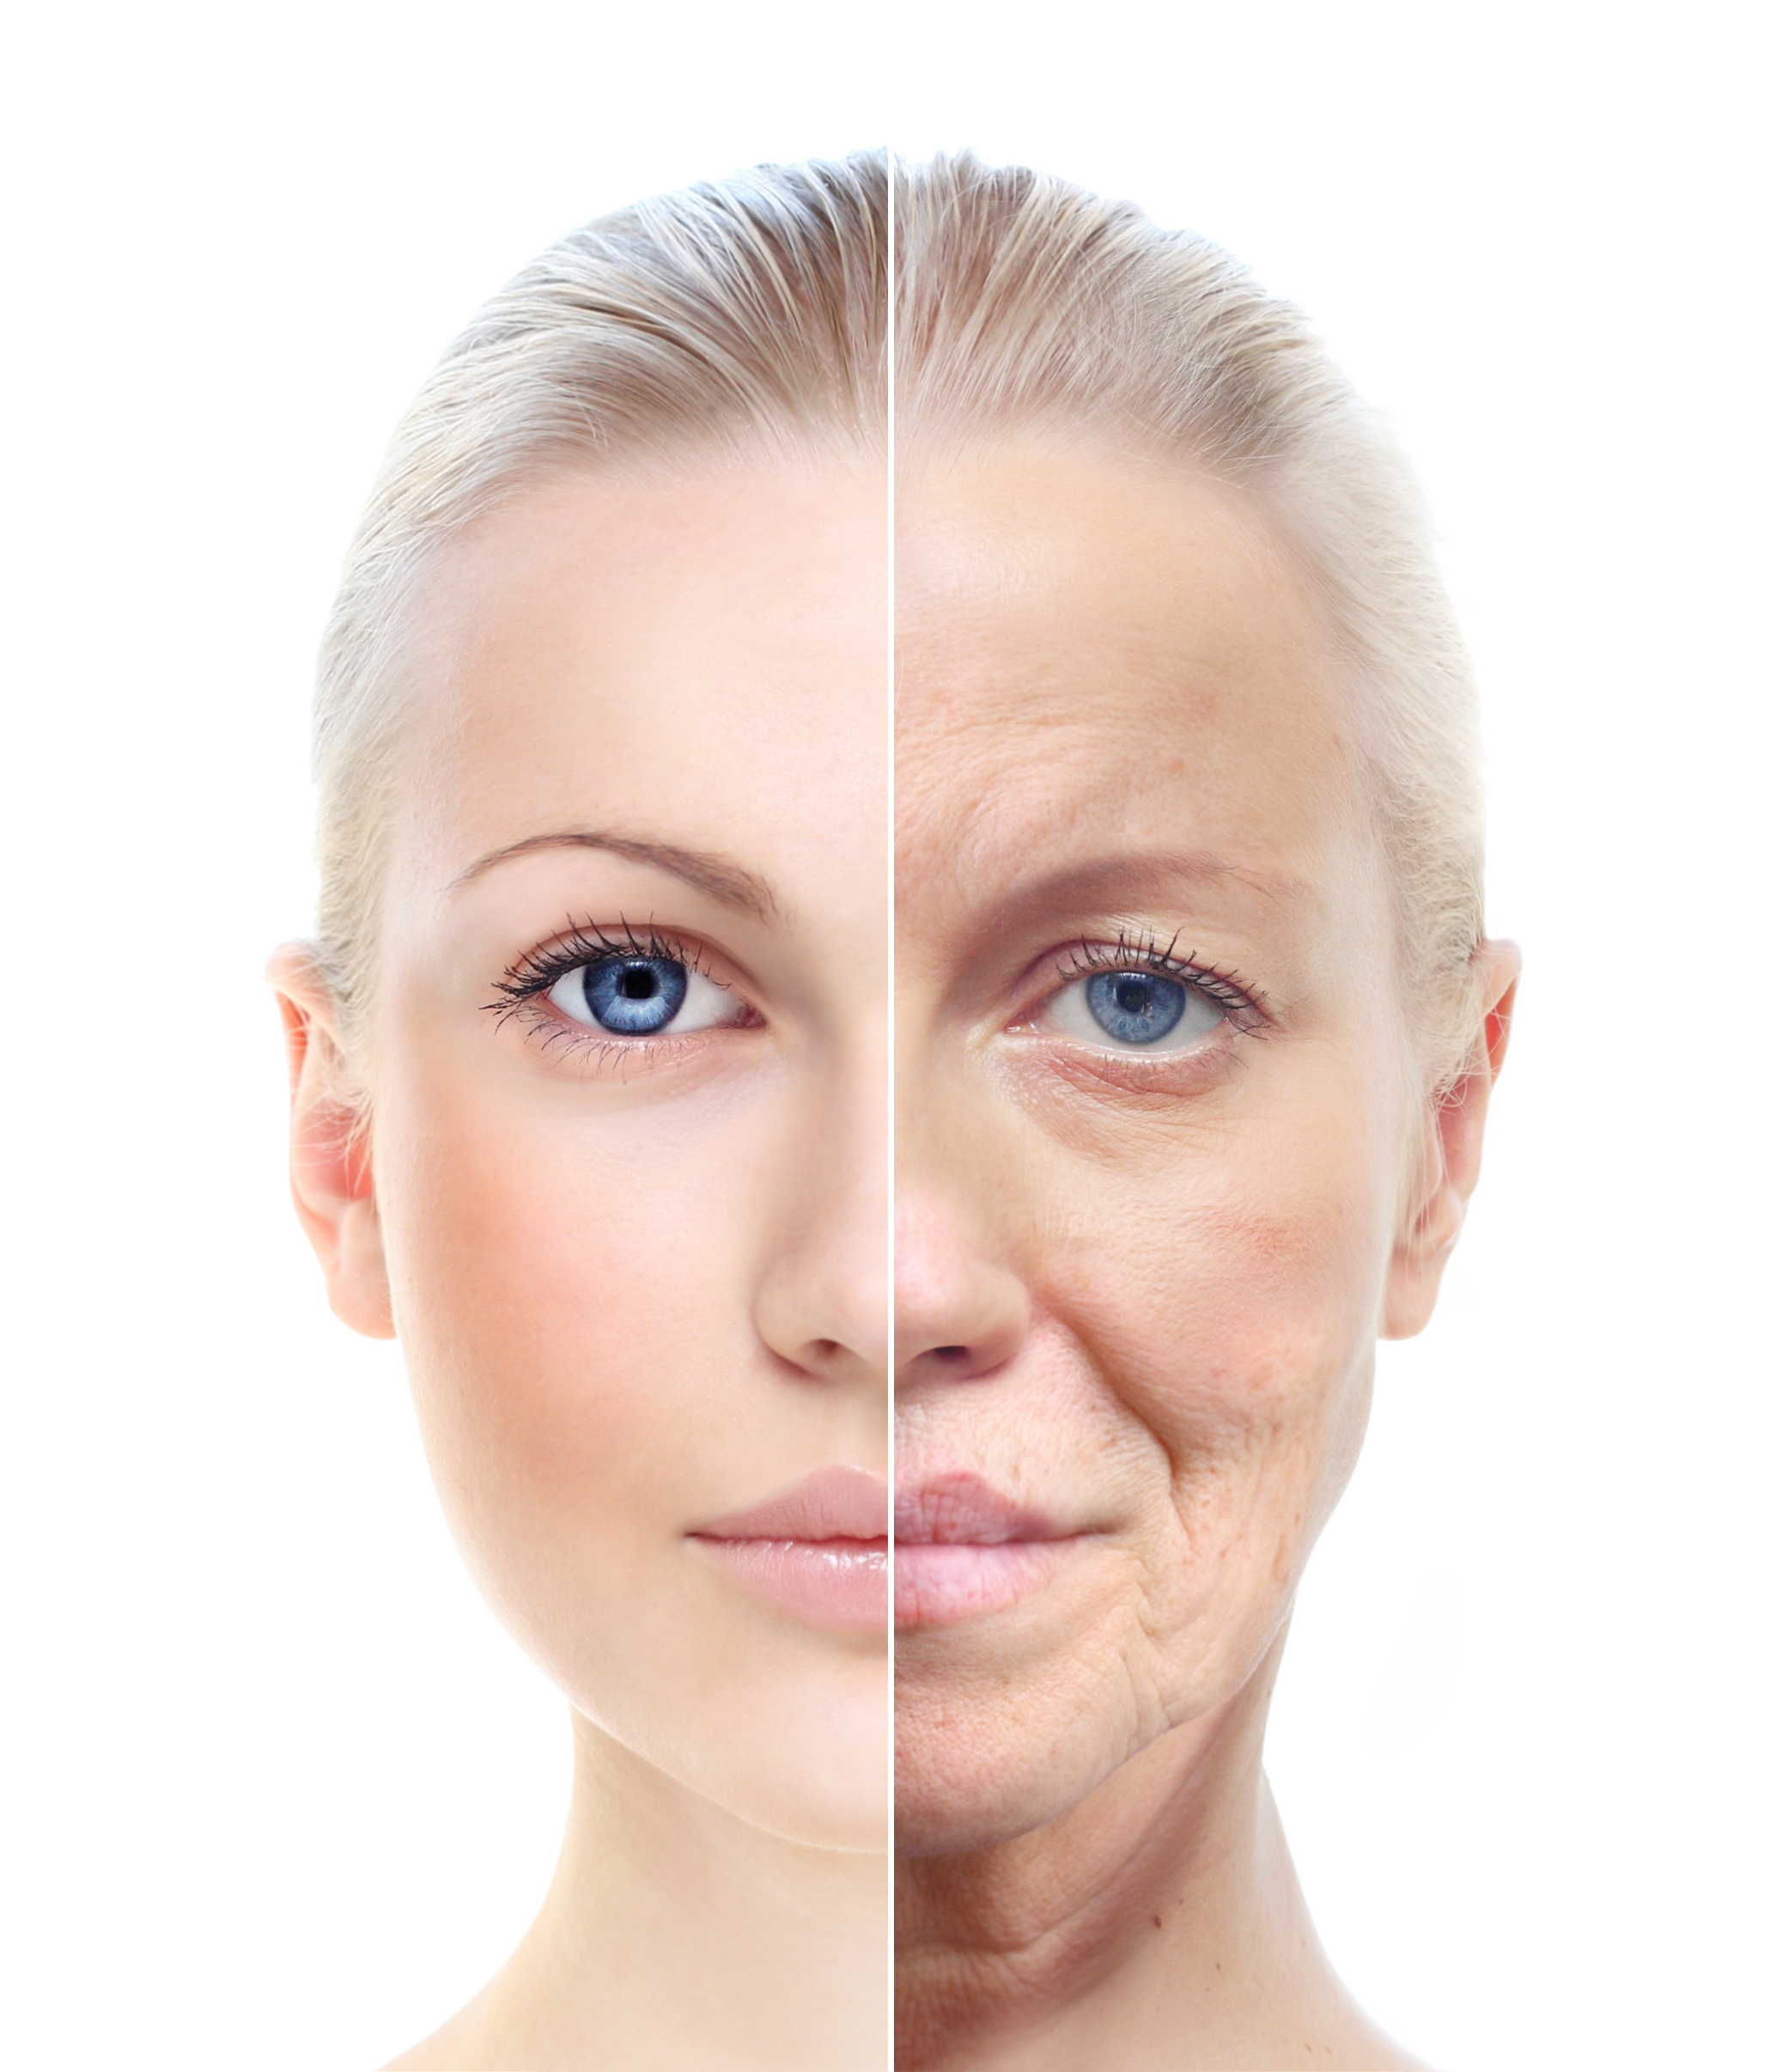 Collagen is the Fountain of Youth